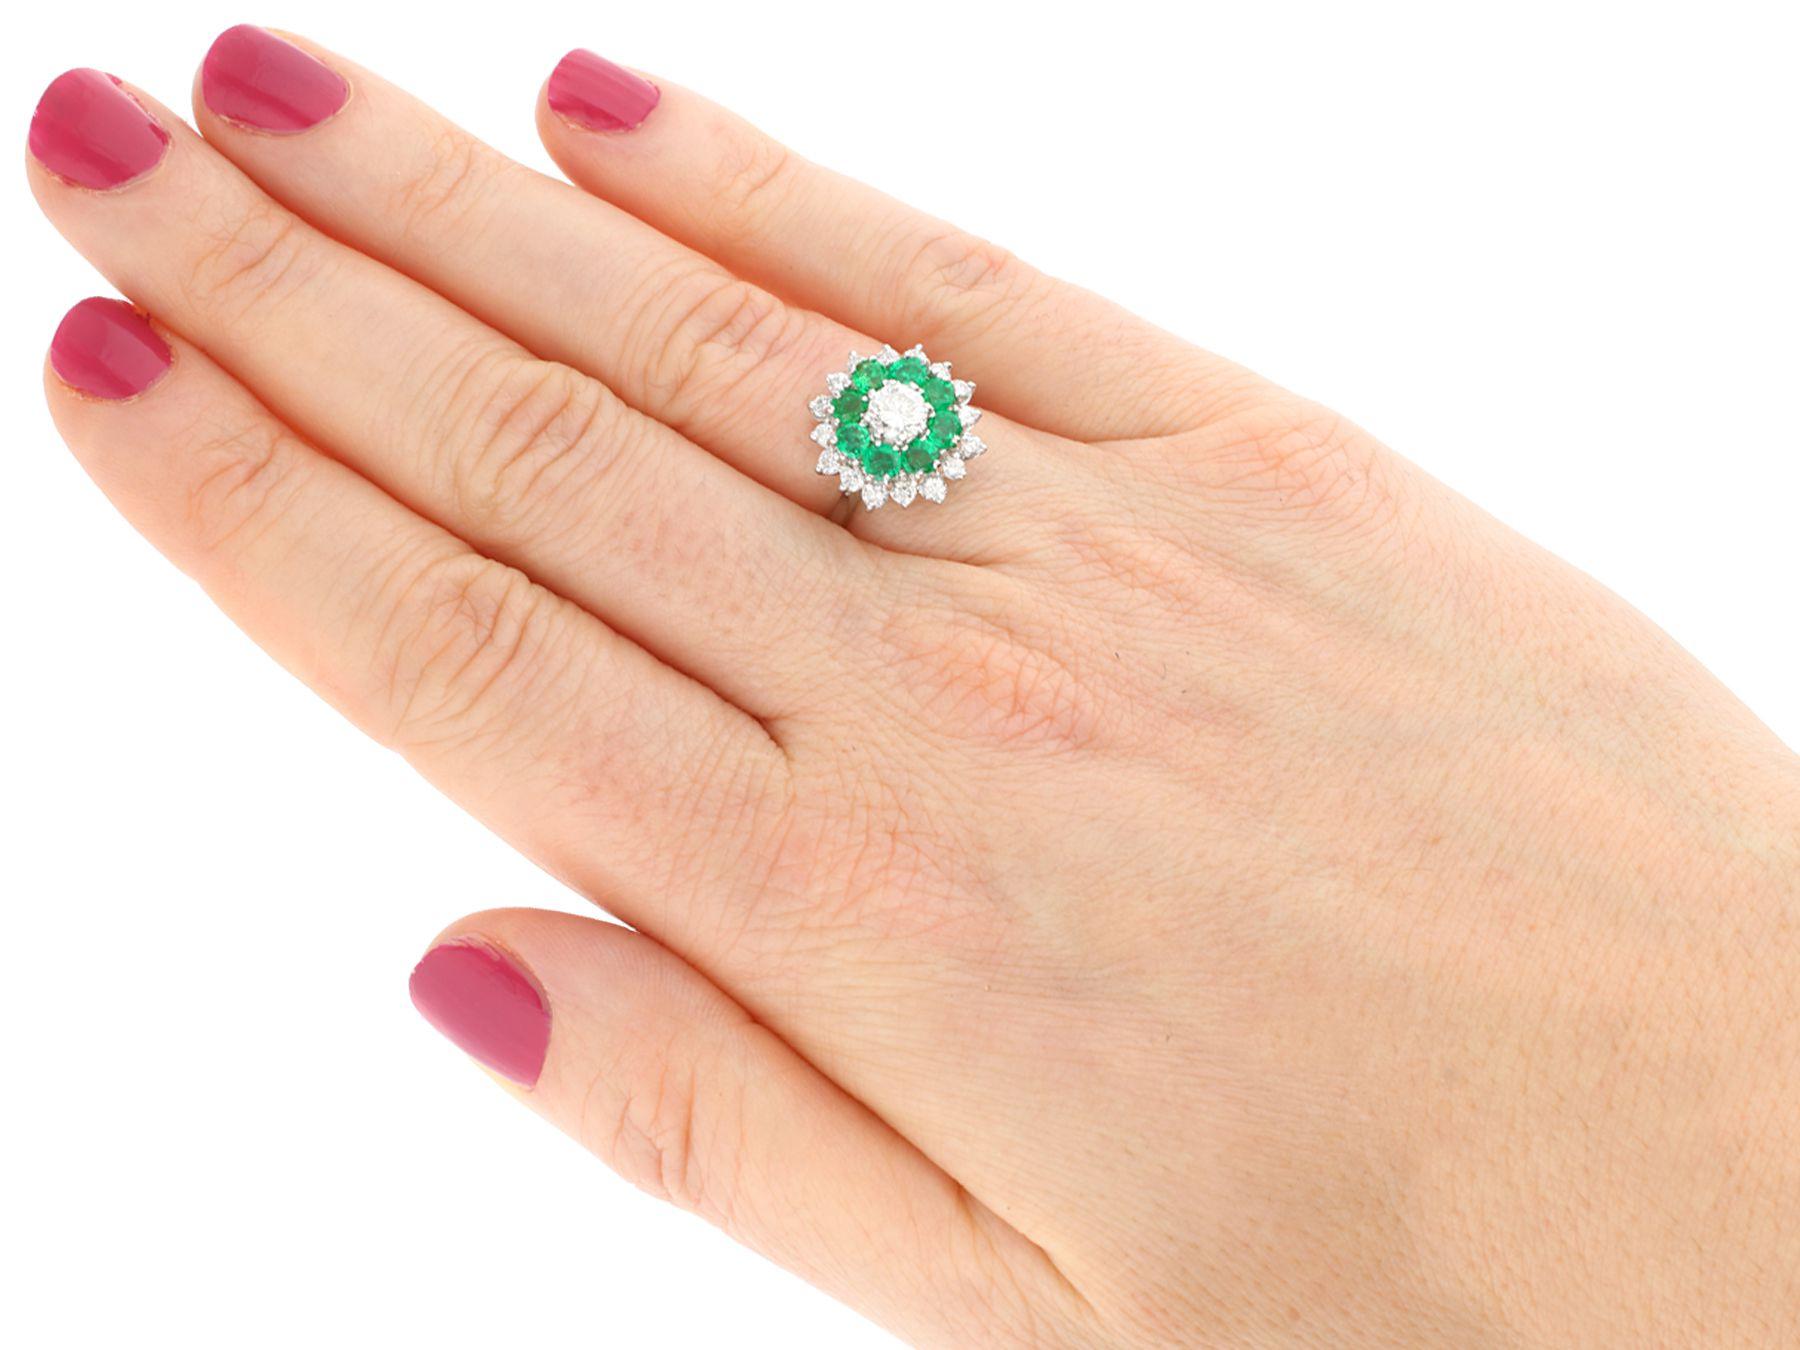 Vintage 1.23 Carat Diamond and Emerald White Gold Cocktail Ring, Circa 1970 For Sale 1